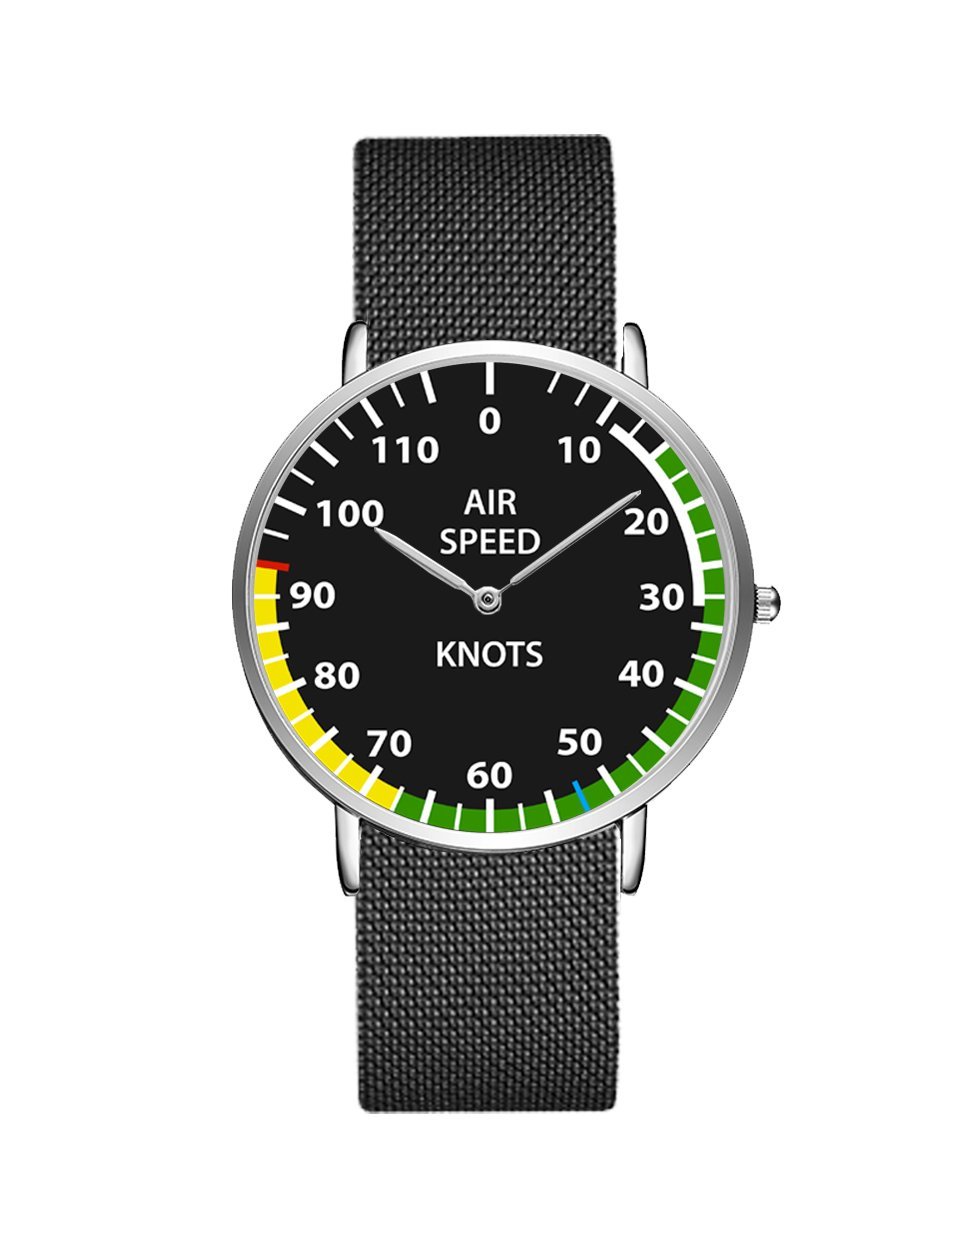 Airplane Instrument Series (Airspeed) Stainless Steel Strap Watches Pilot Eyes Store Silver & Black Stainless Steel Strap 